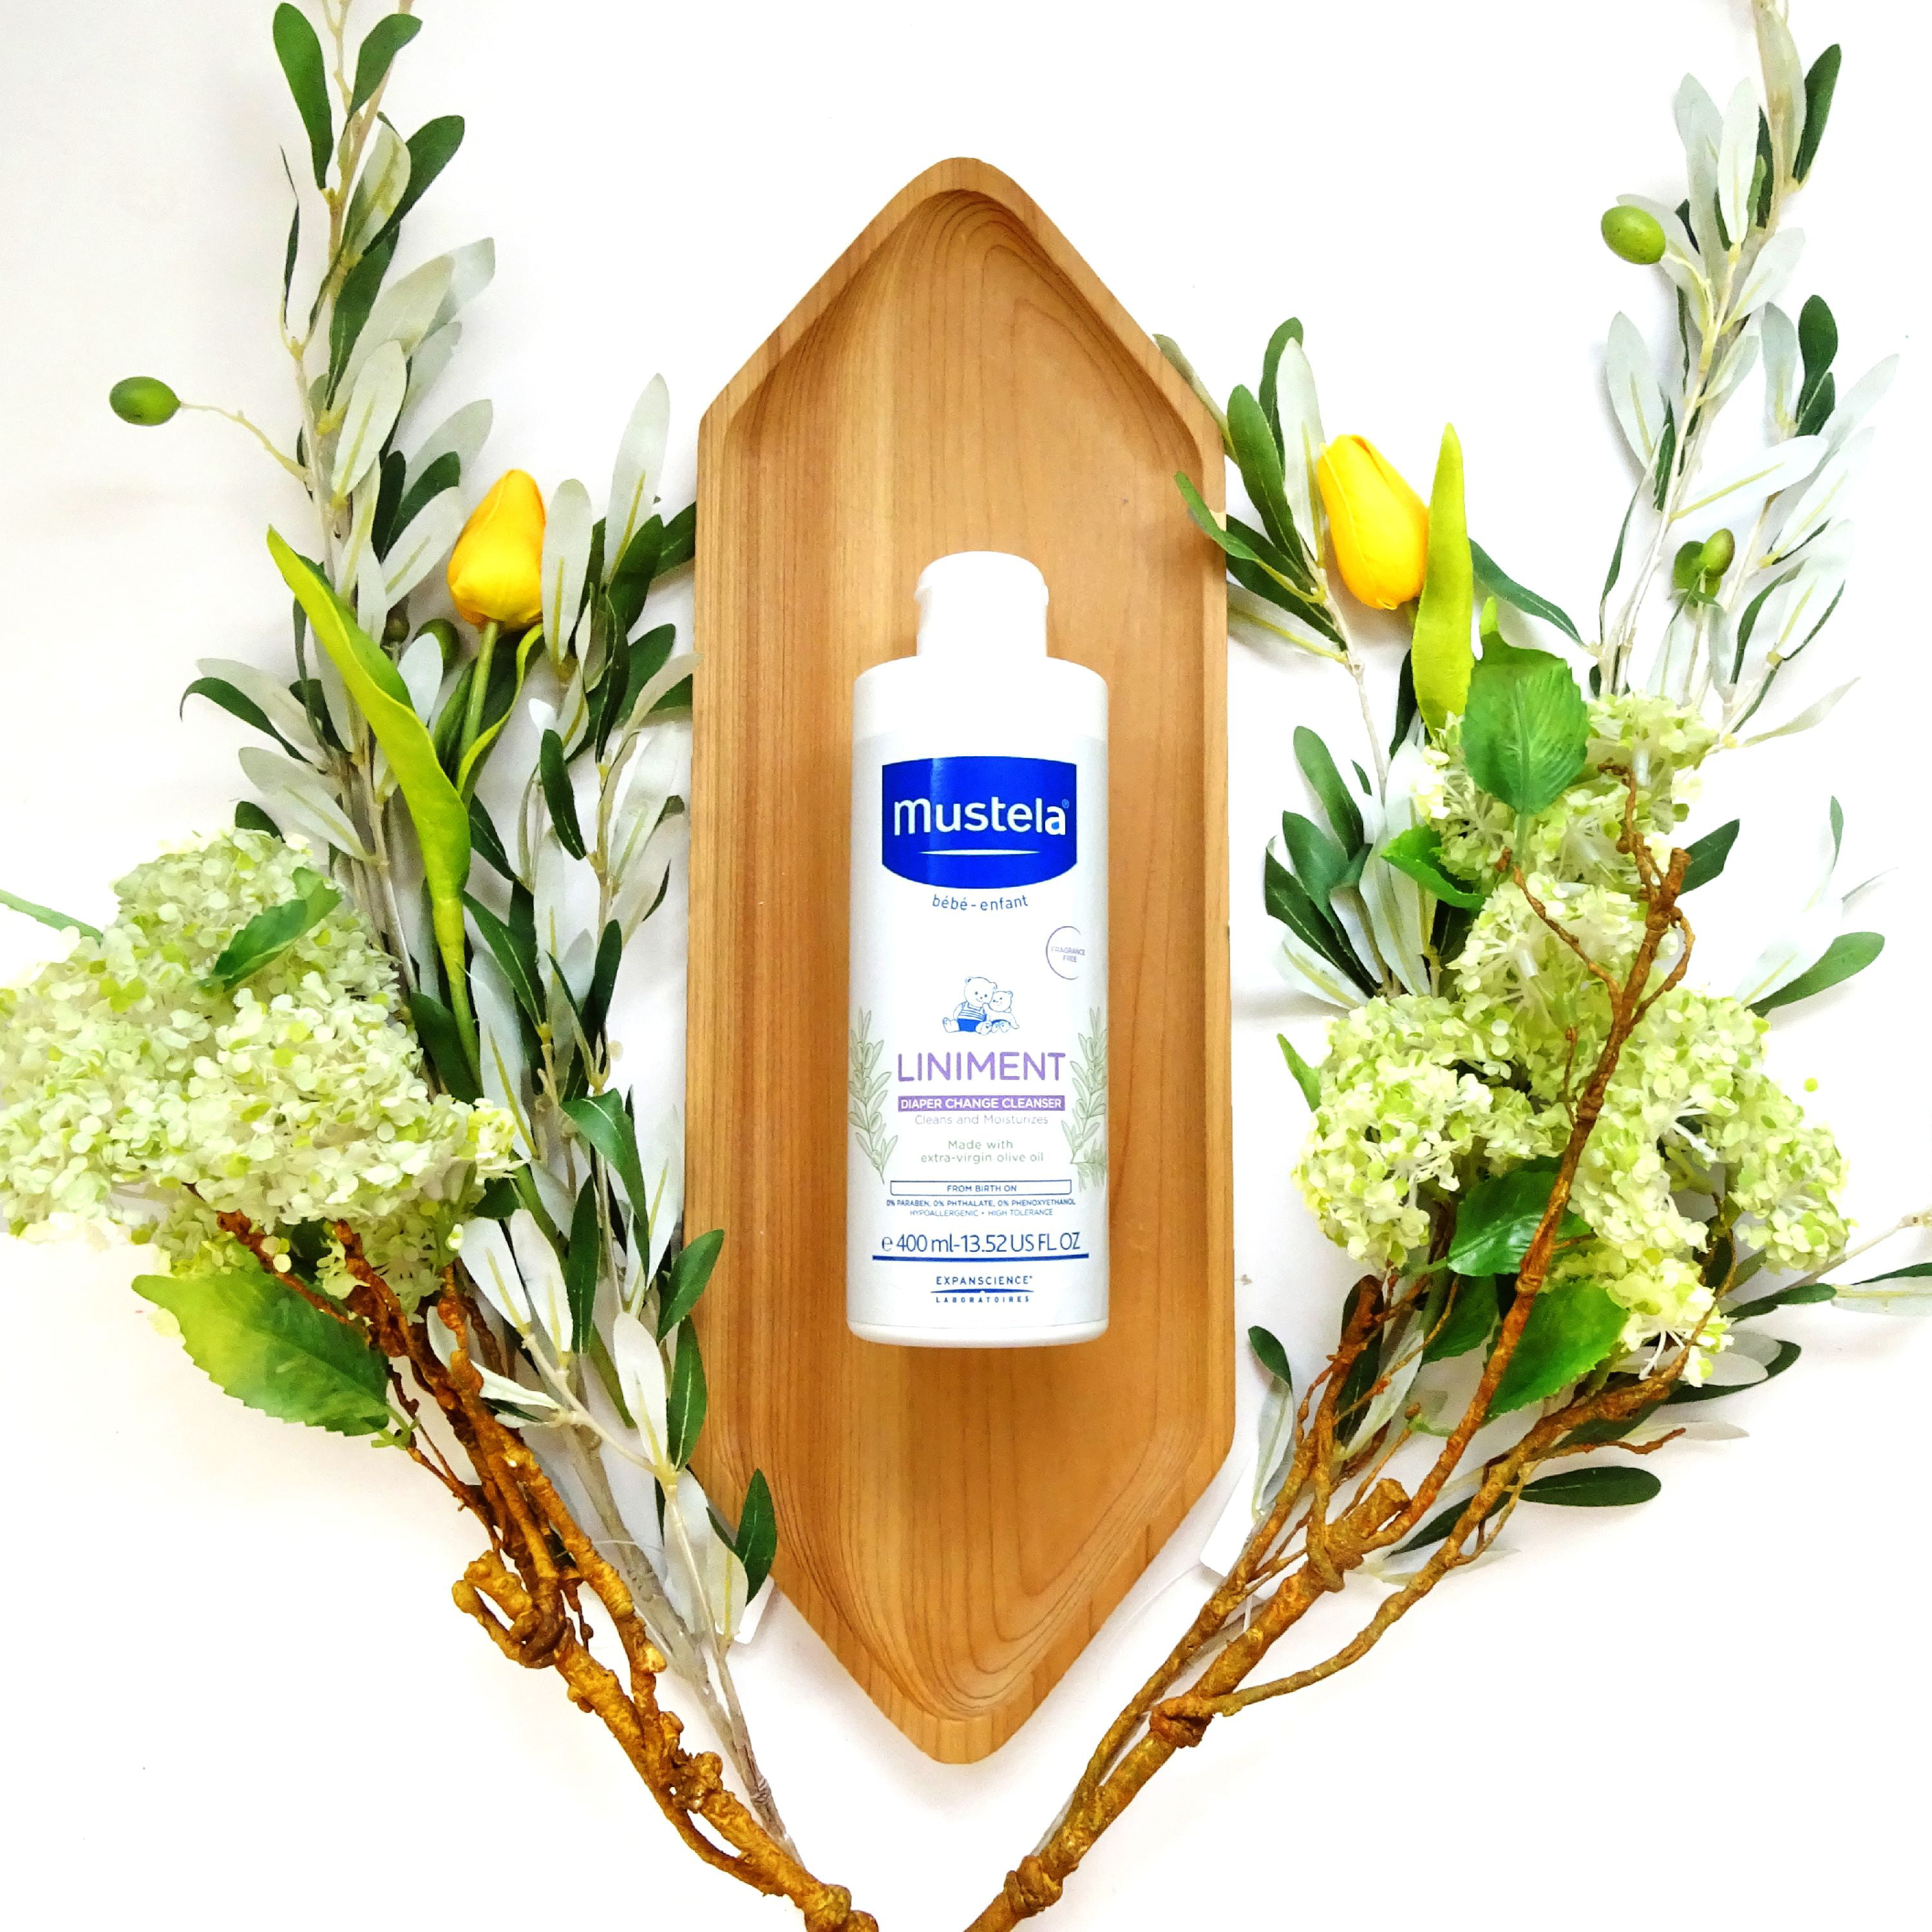 Mustela USA - Mustela Liniment contains 99% natural ingredients and is  enriched with skin-soothing extra virgin olive oil, which moisturizes and  protects your baby's bottoms.  IG  @_momto6_